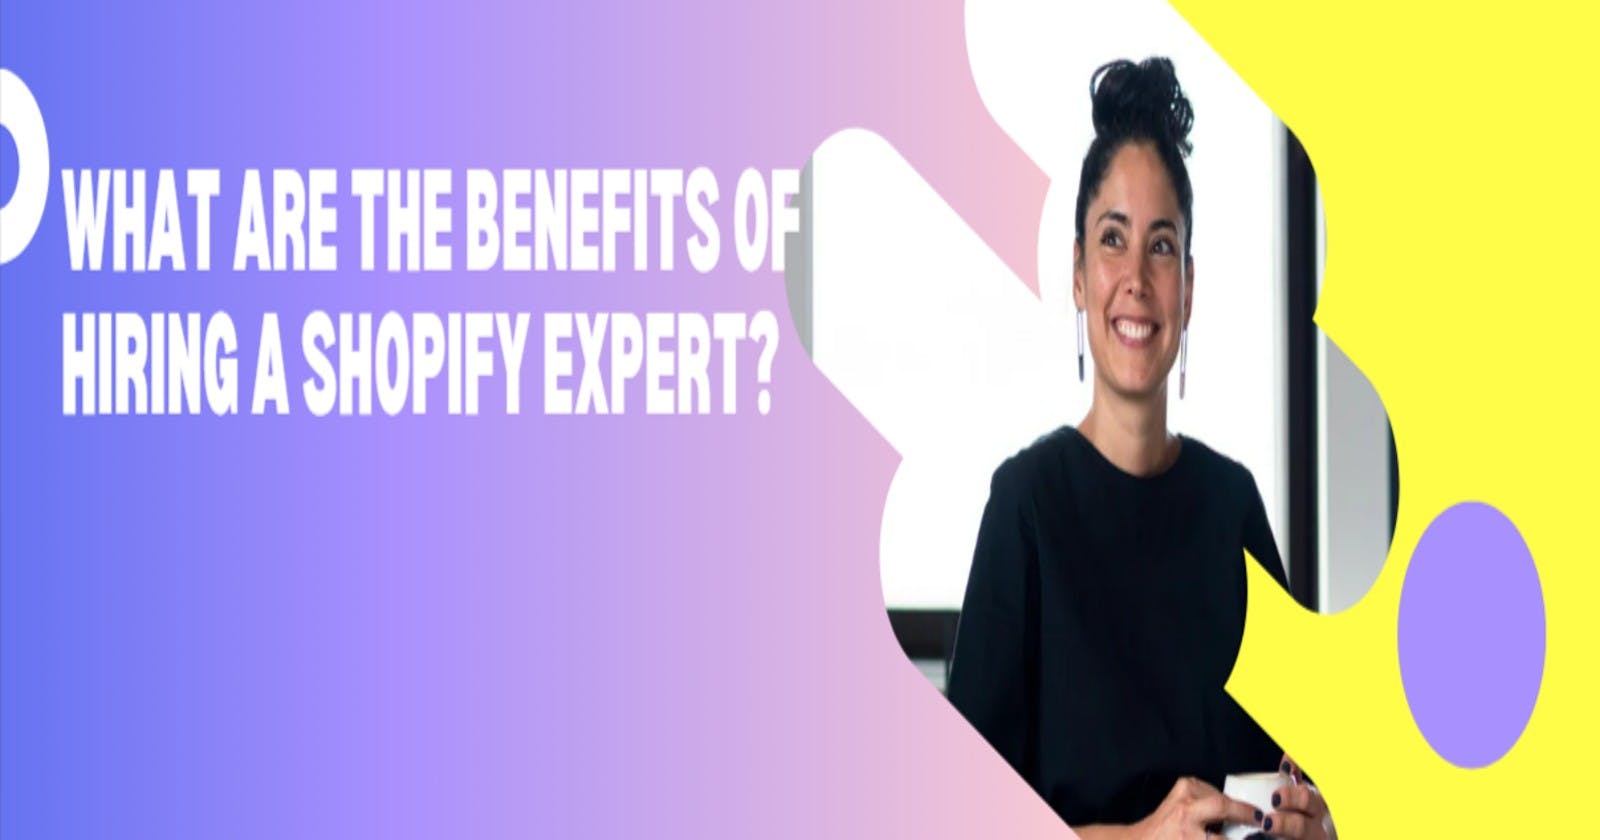 What are the benefits of hiring a Shopify expert?